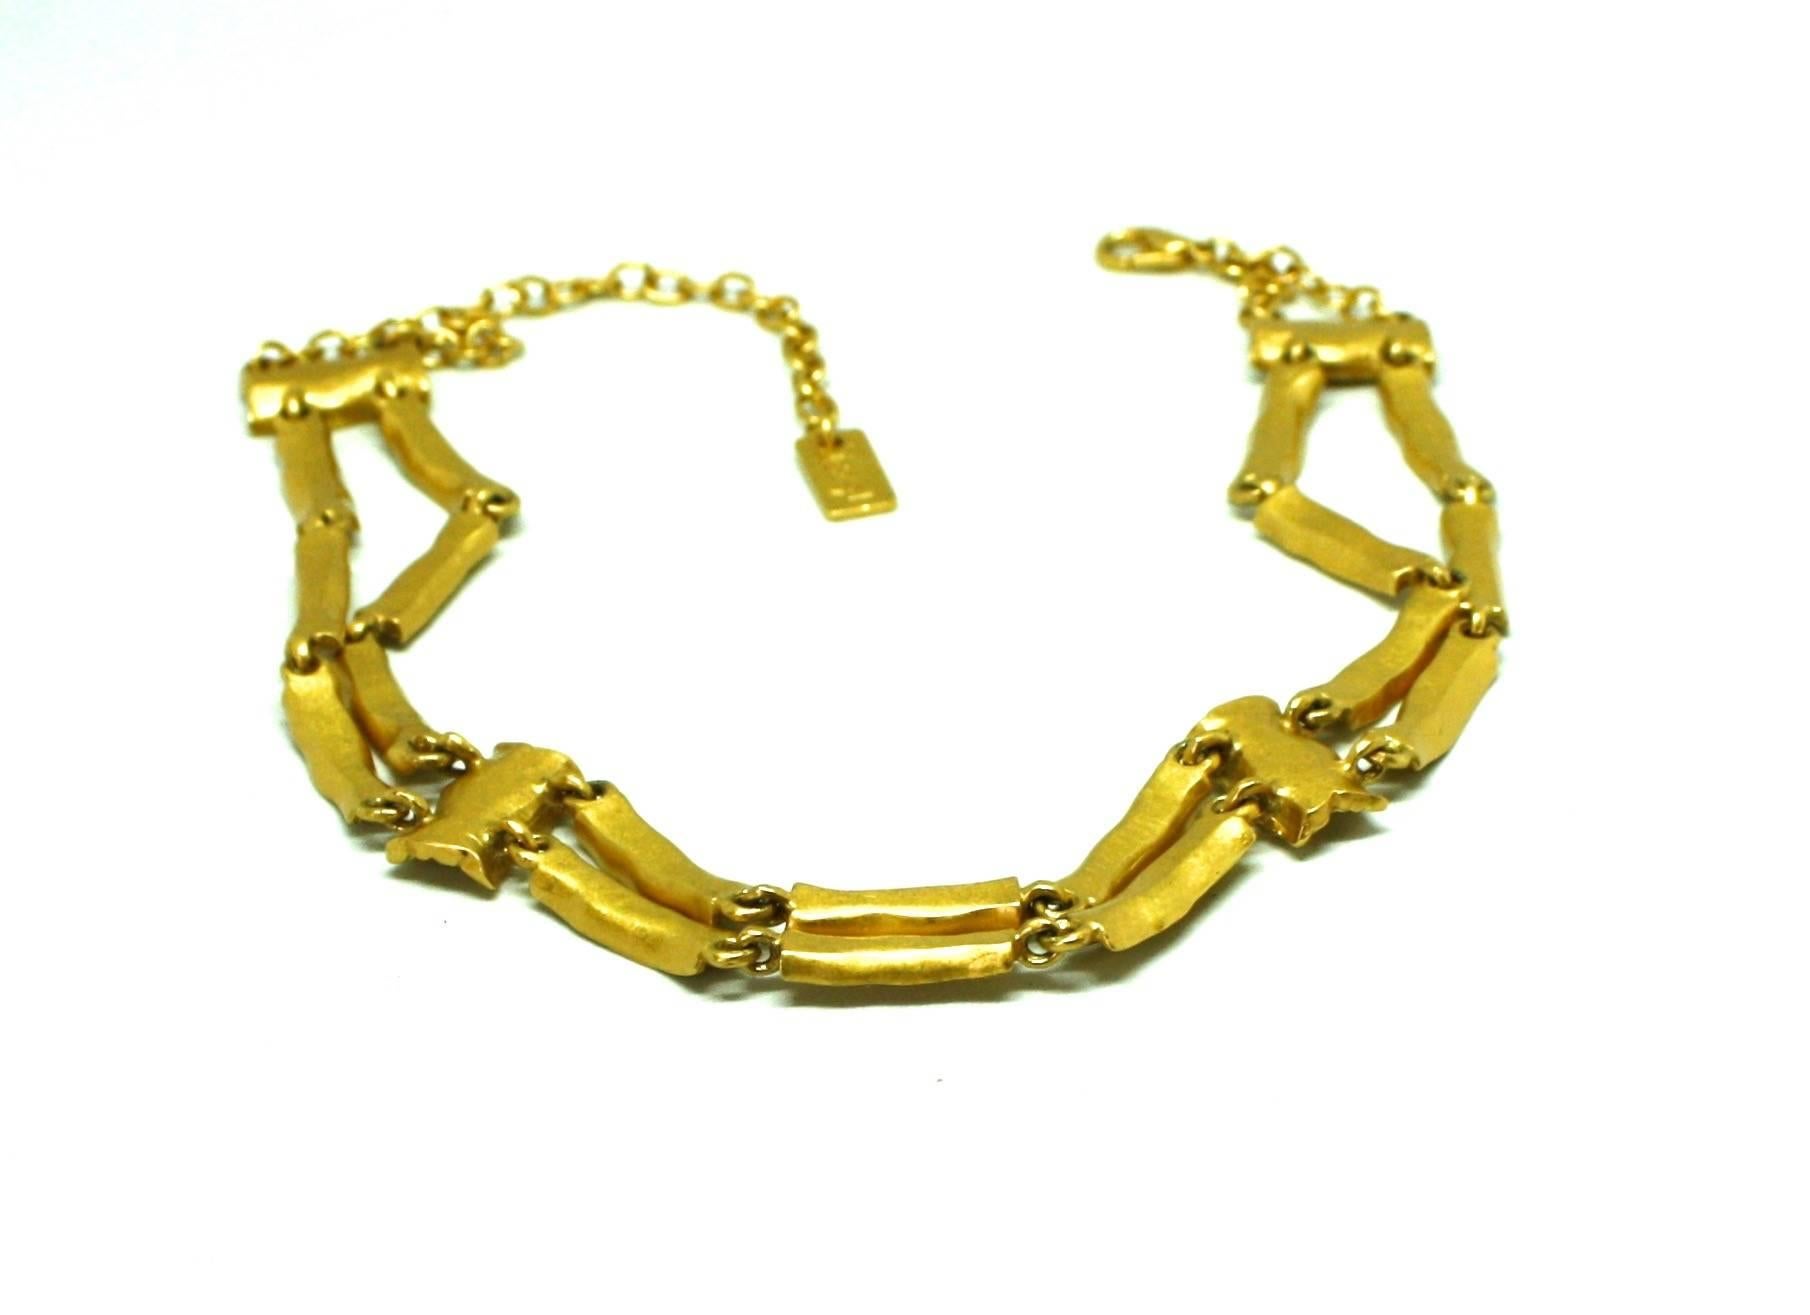 Very stylish brushed gold plated choker by Yves St Laurent from the 1980's. The choker is very unusual because it has been designed to be worn in two ways. One side is a smooth brushed gold plate and the other side has a textured effect. The